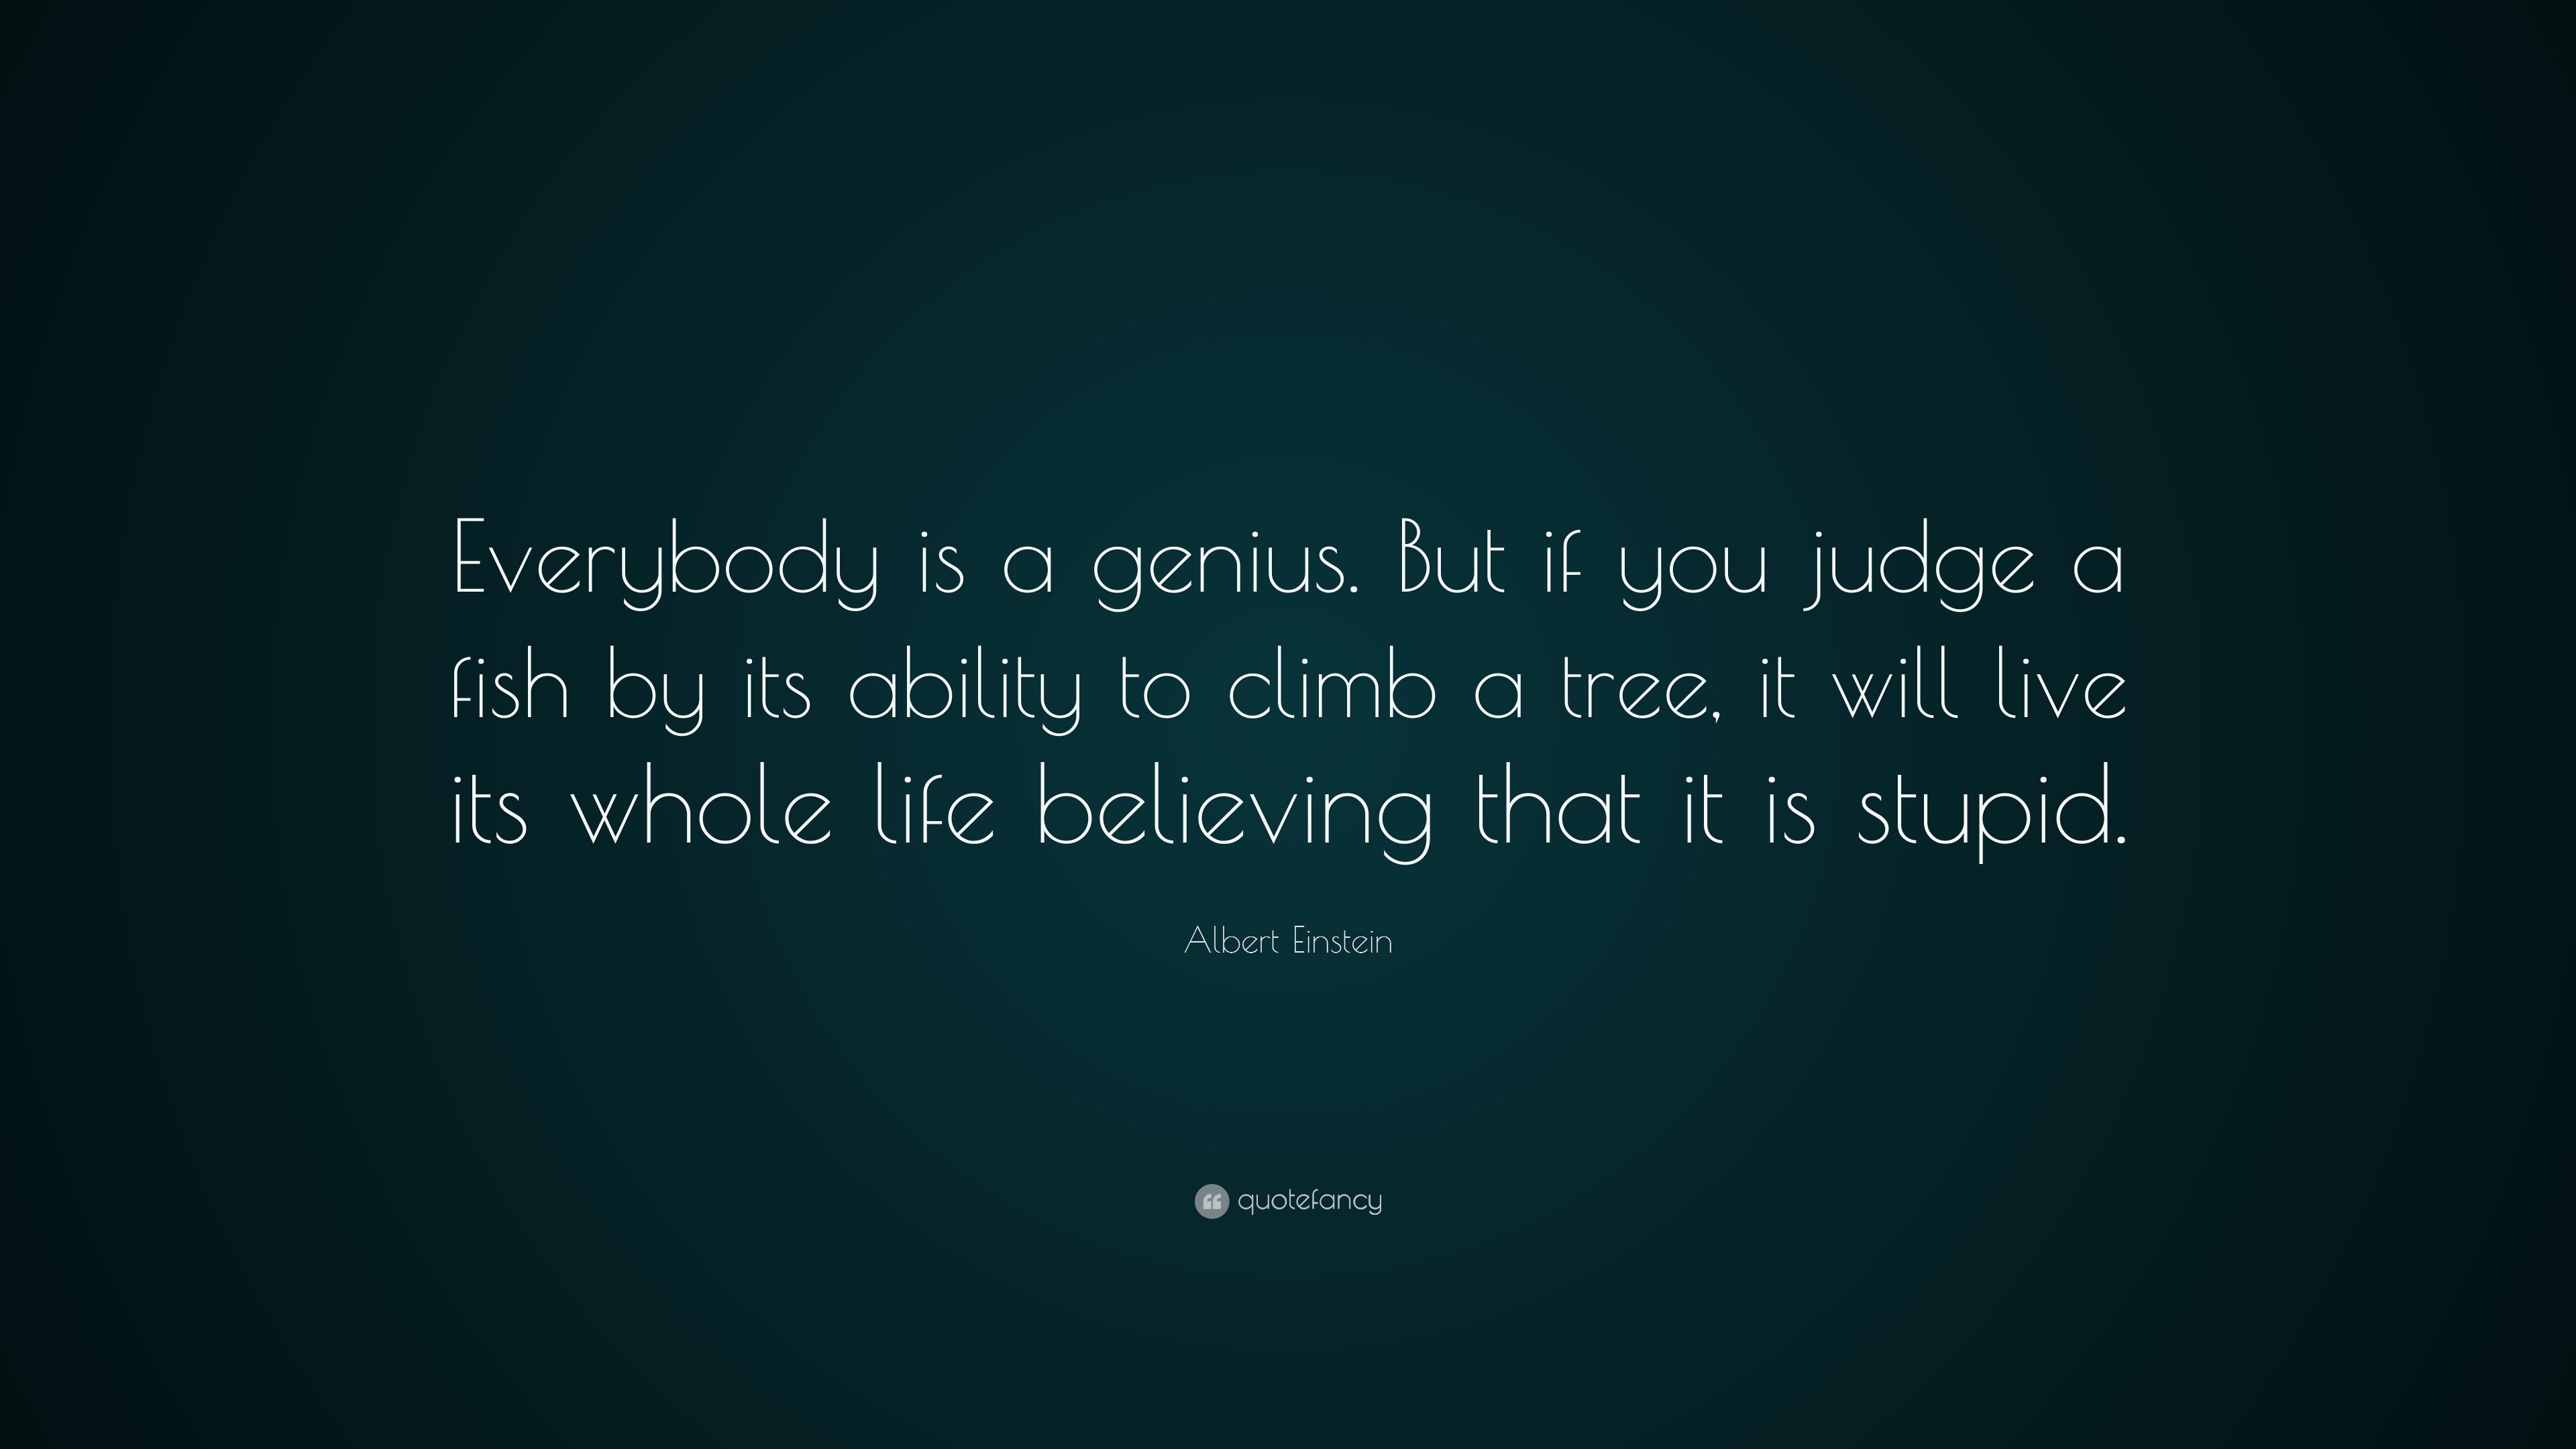 3840x2160 Albert Einstein Quote: “Everybody is a genius. But if you judge a fish